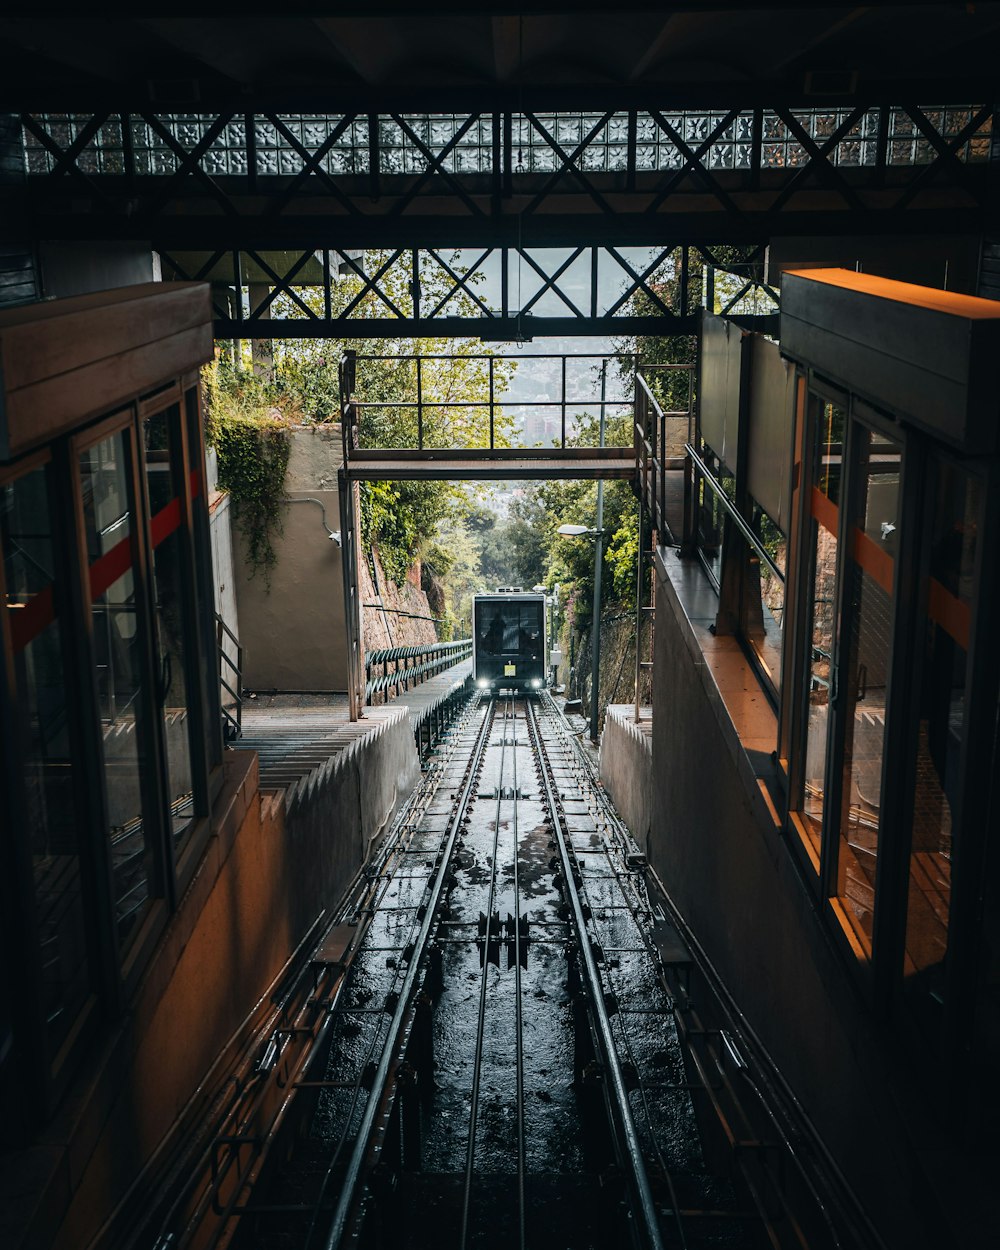 an overhead view of a train track in the rain